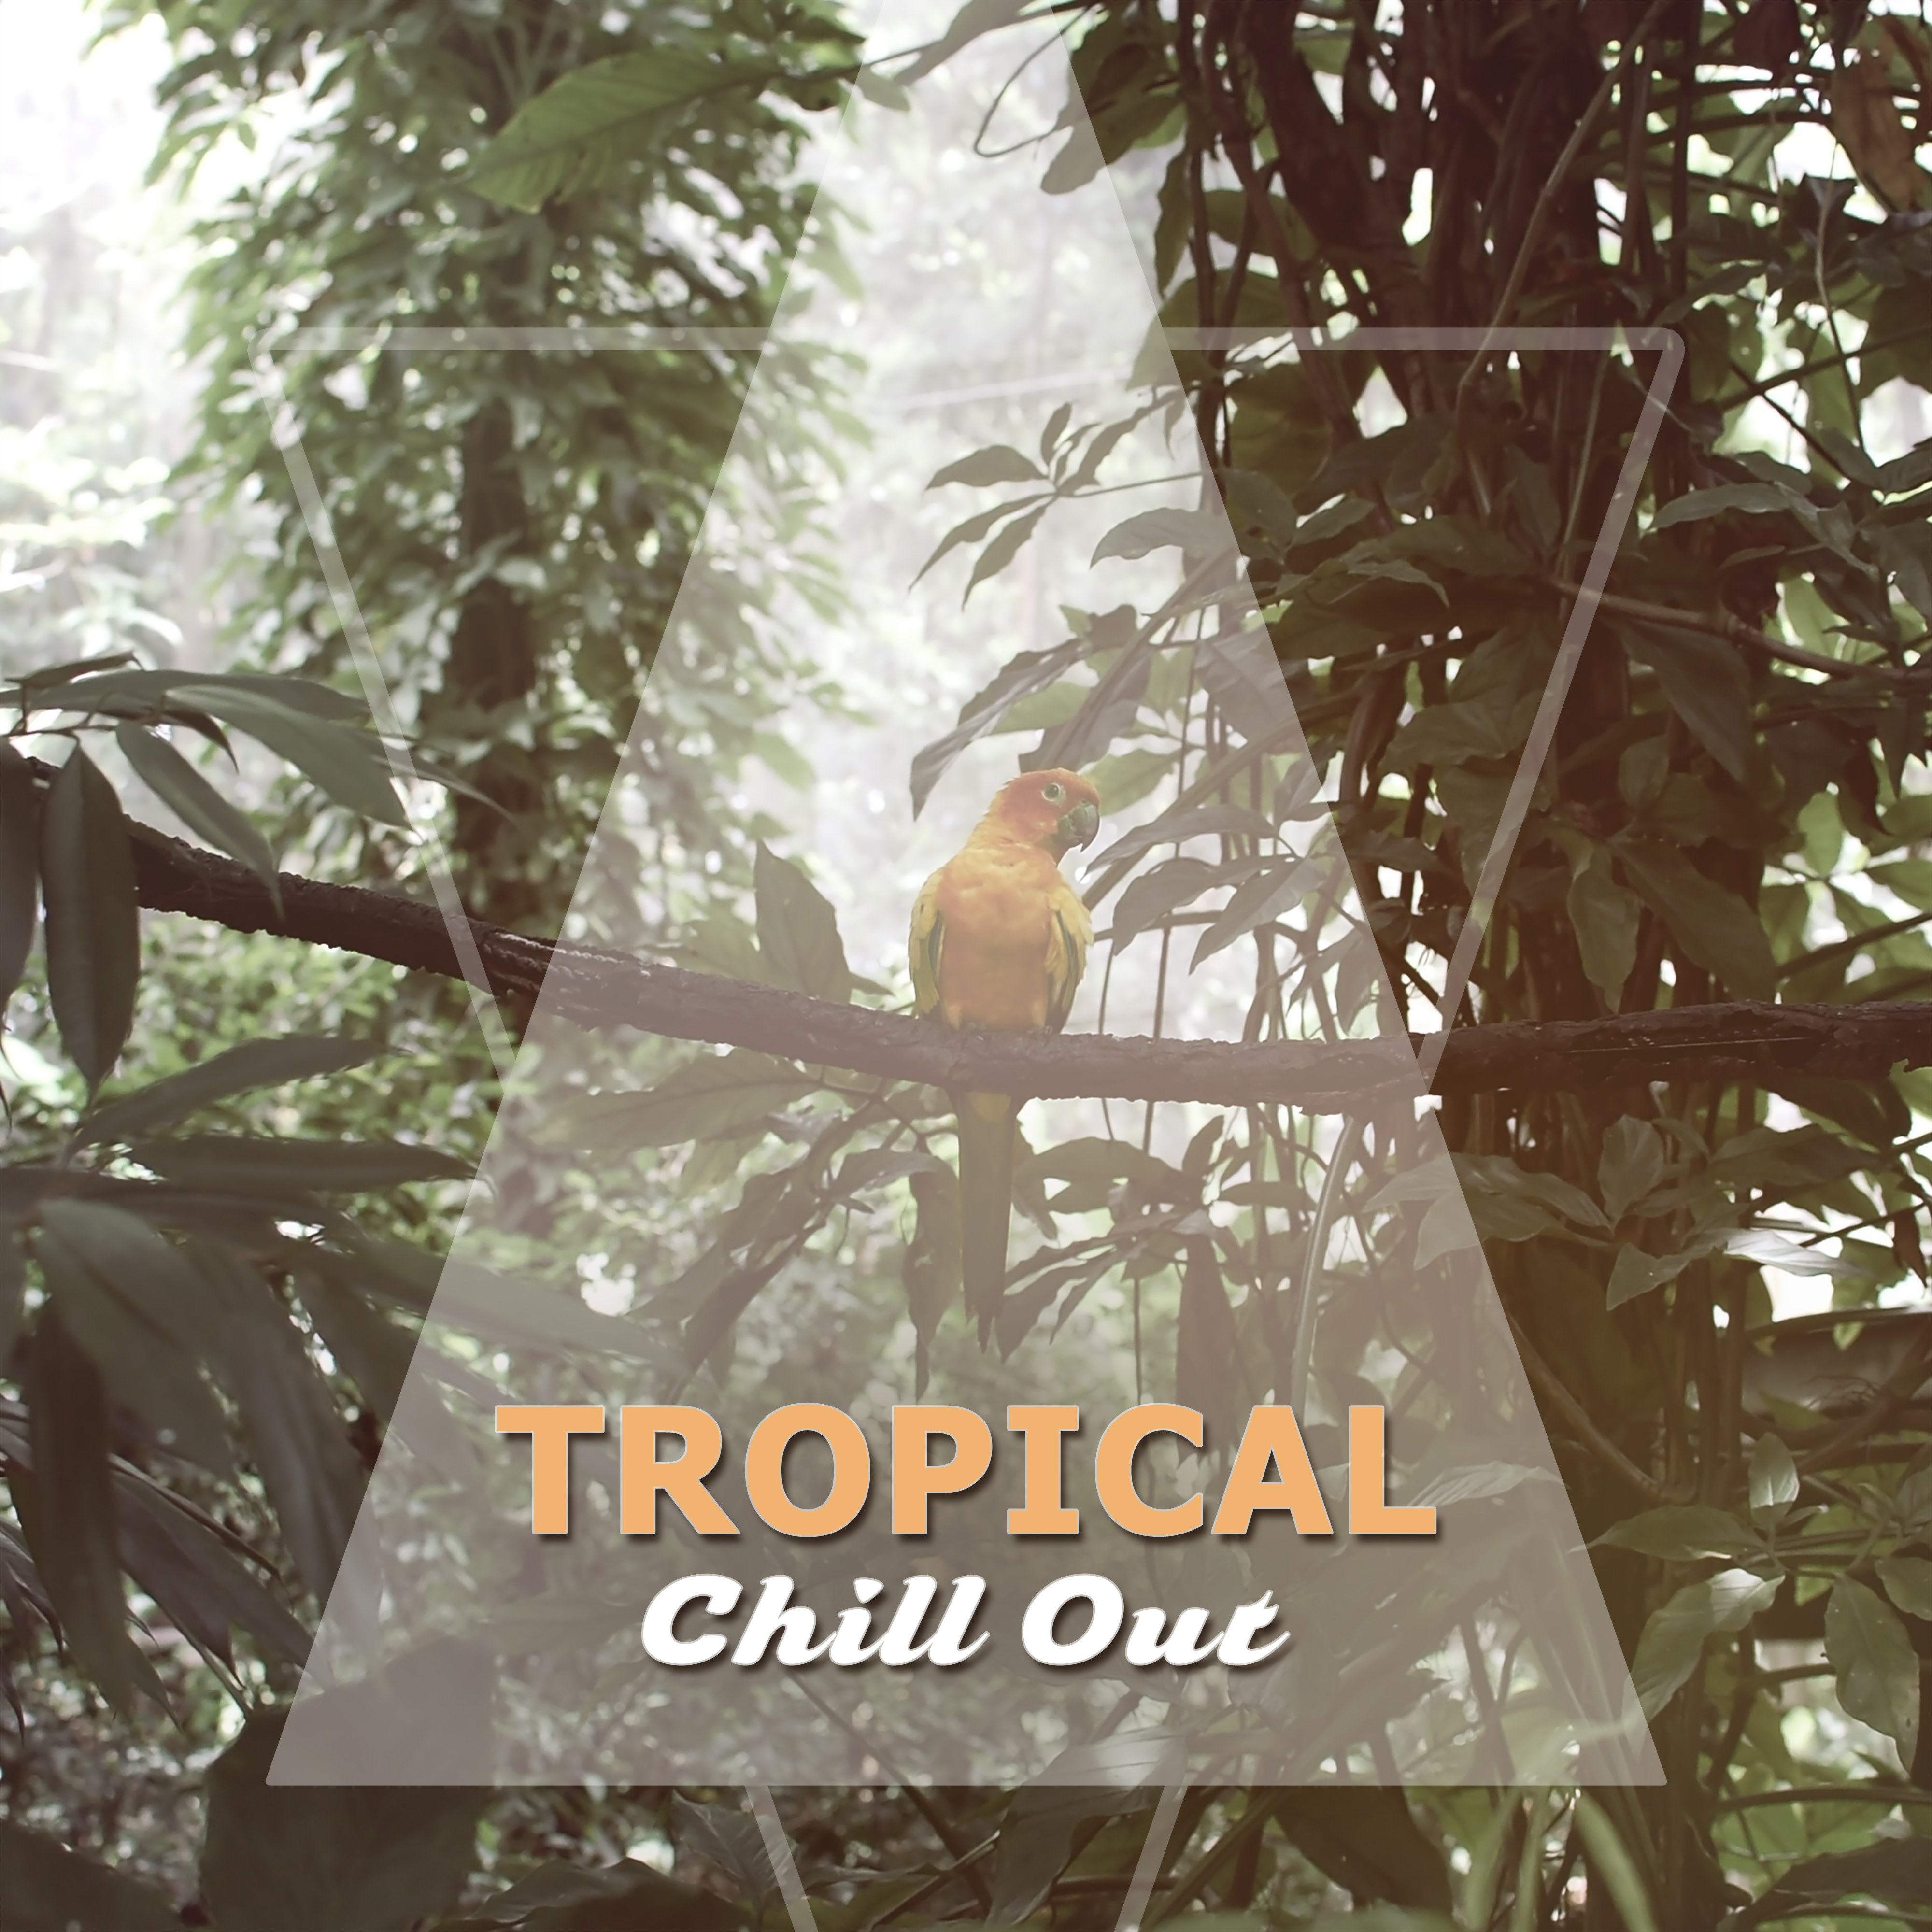 Tropical Chill Out – Music to Rest, Journey with Chill Out Music, Sounds to Calm Down, Stress Relief, Summer Vibes